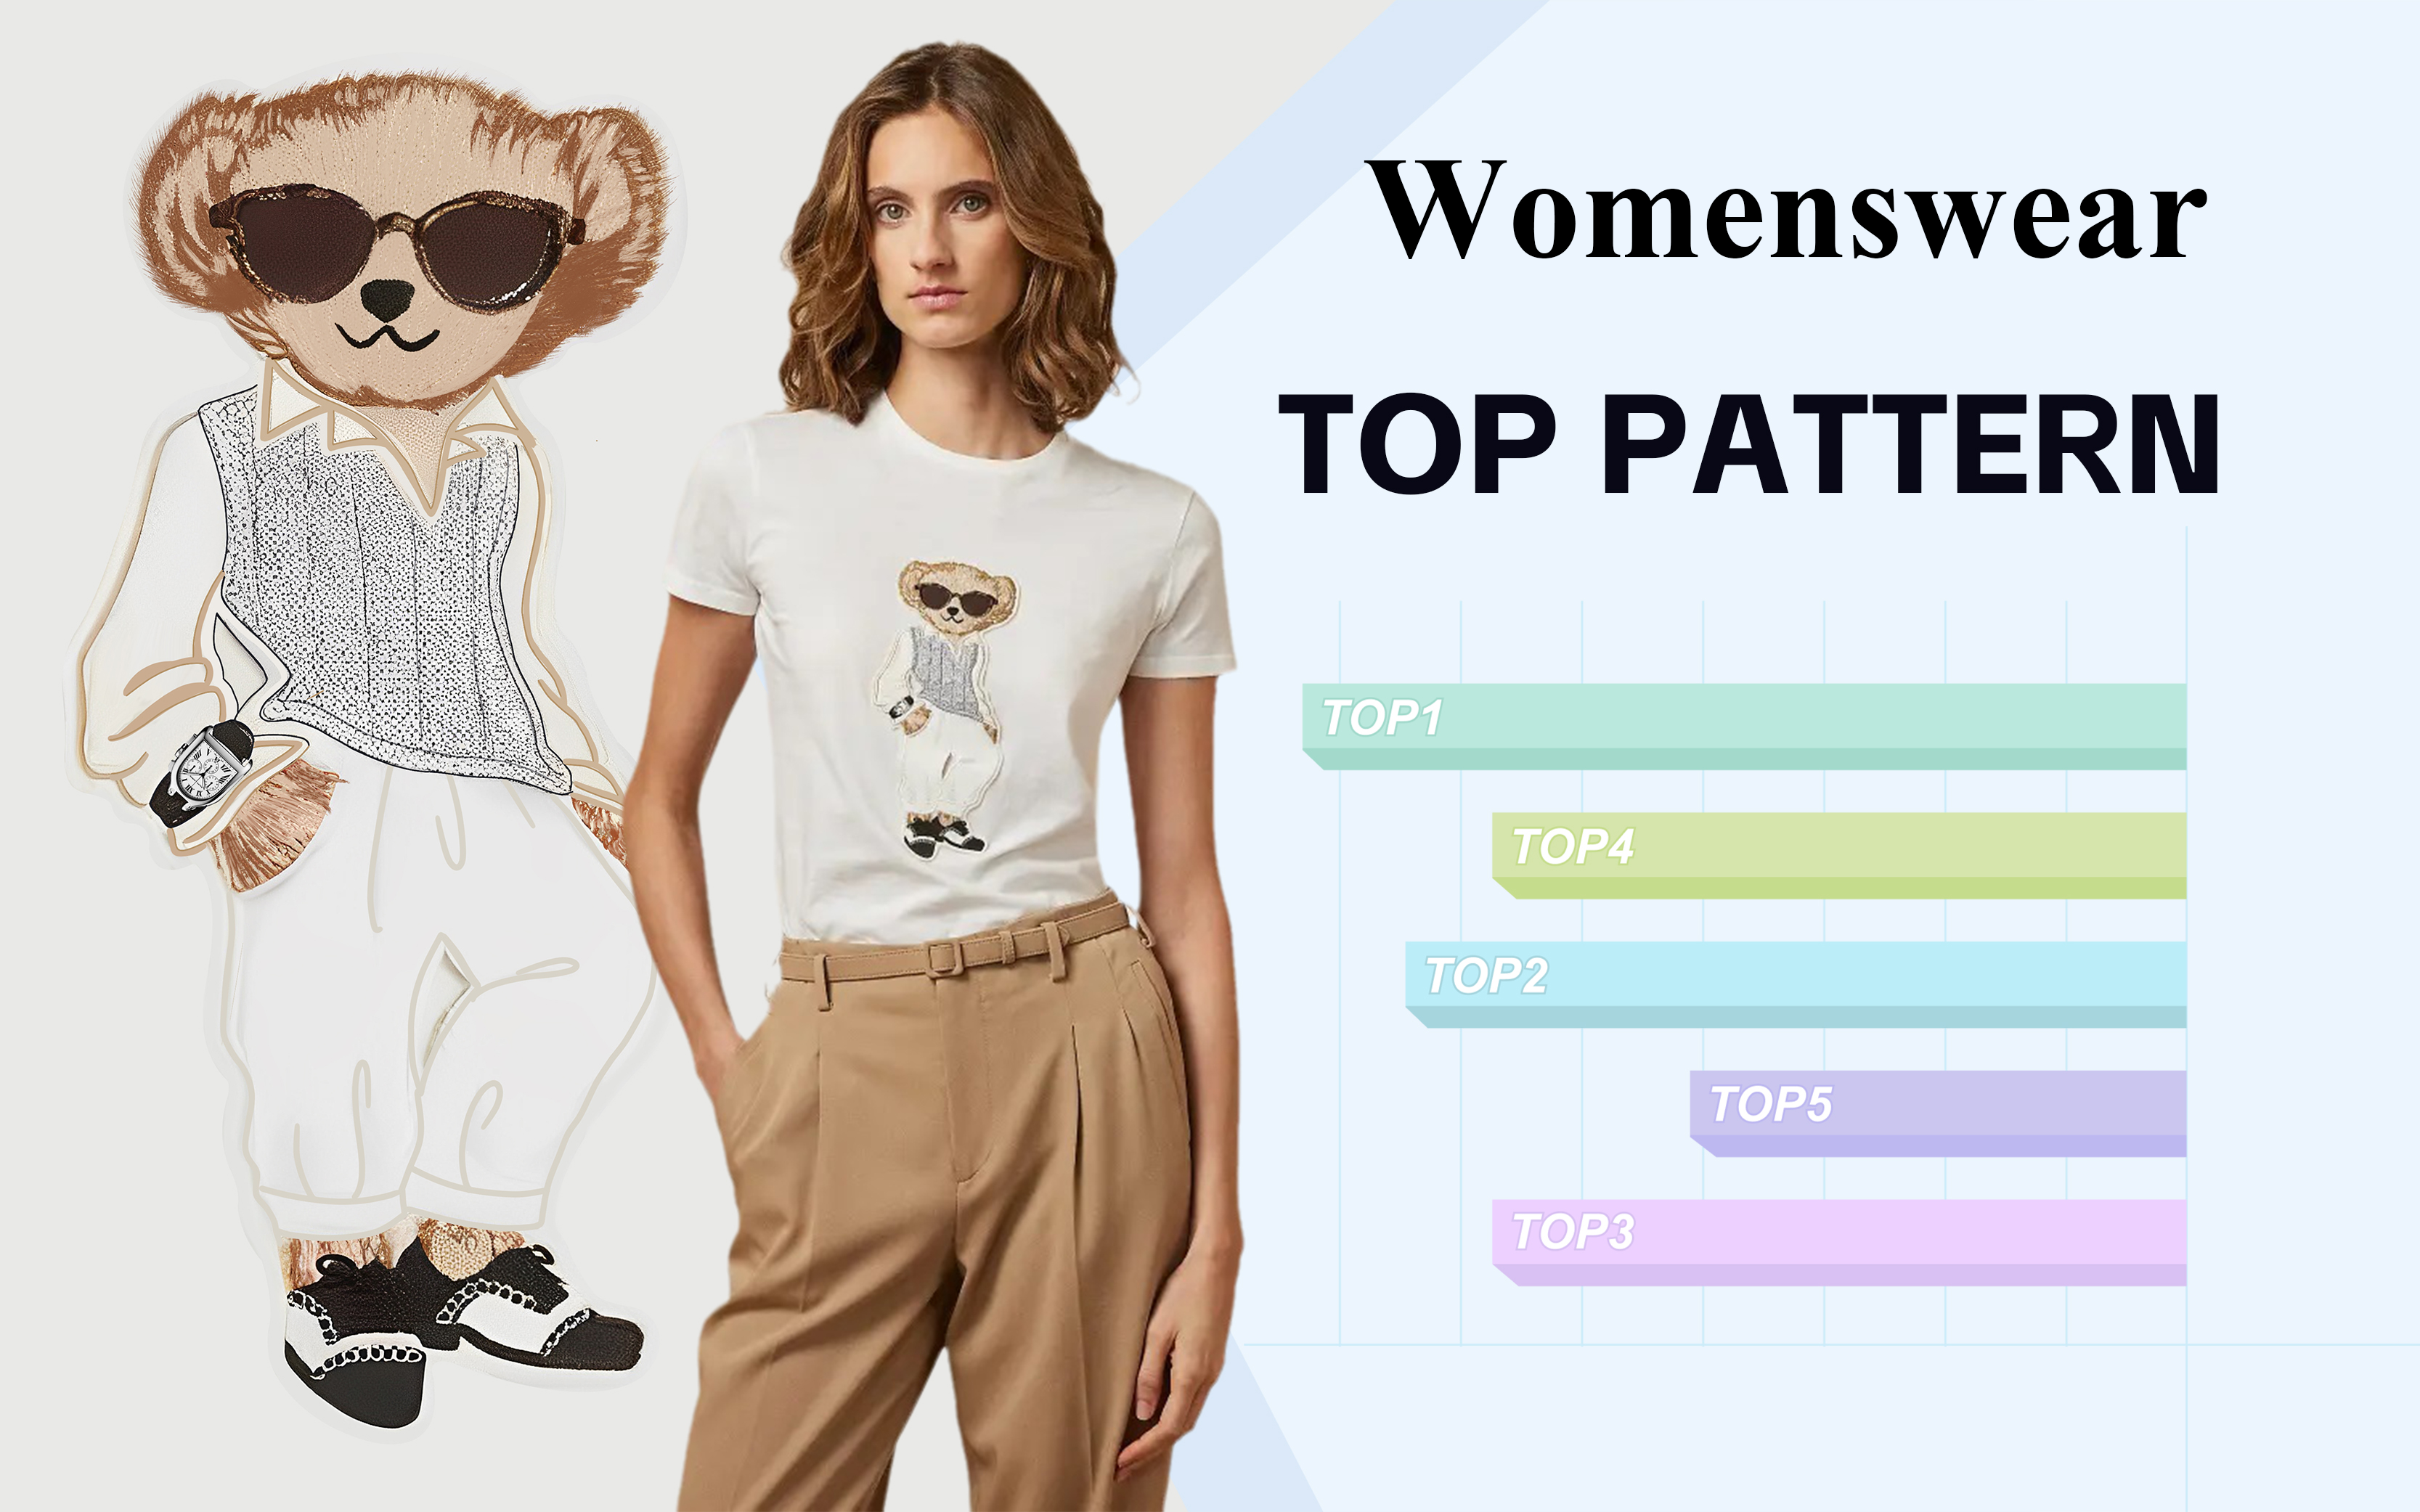 Positional Pattern -- The TOP Ranking of Womenswear